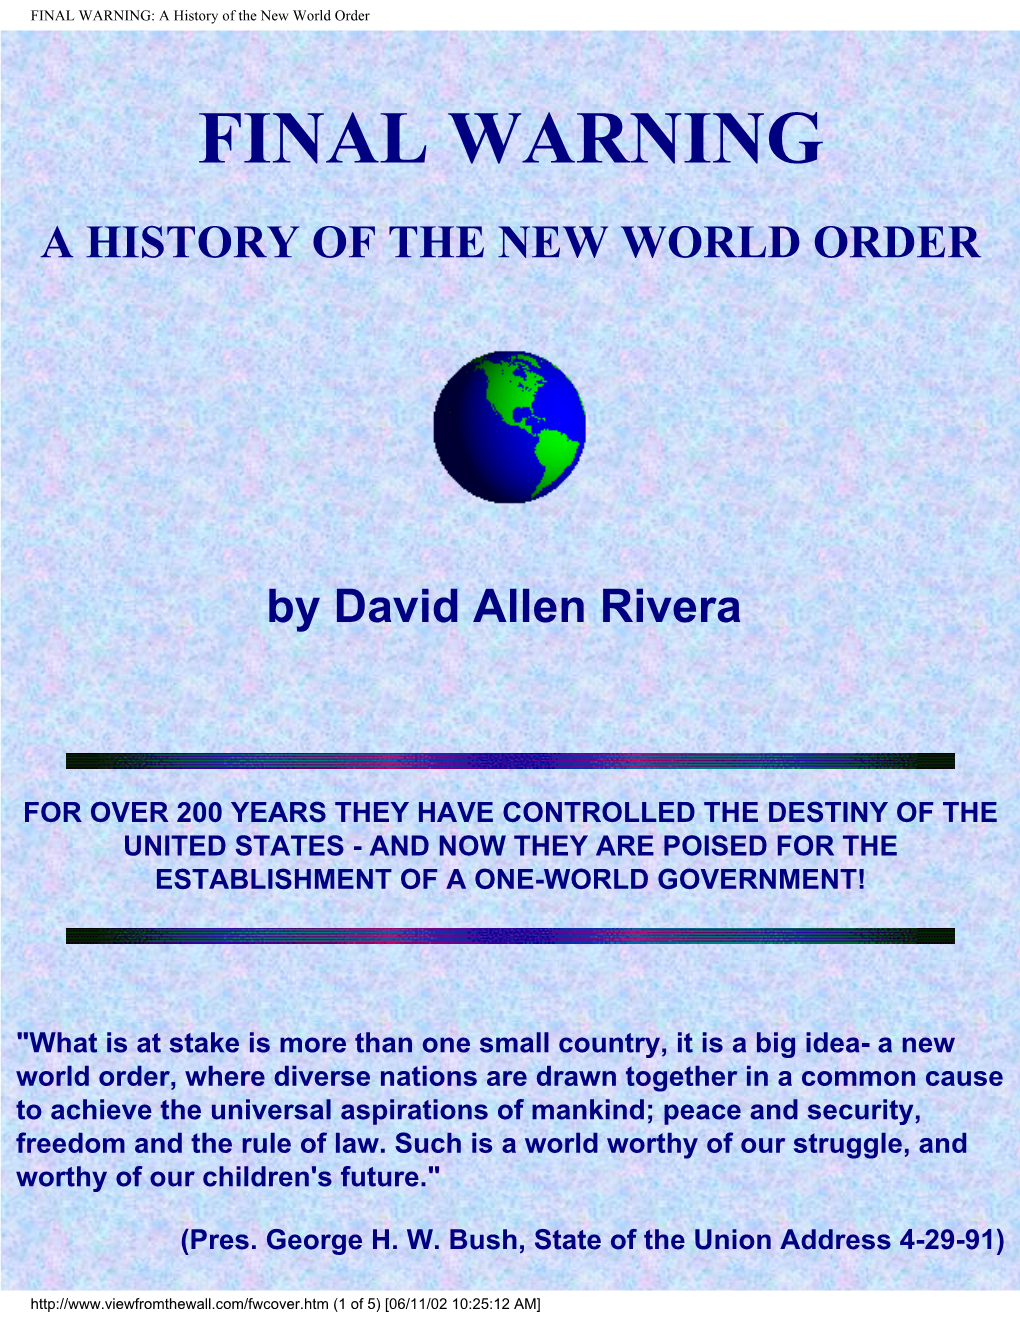 FINAL WARNING: a History of the New World Order